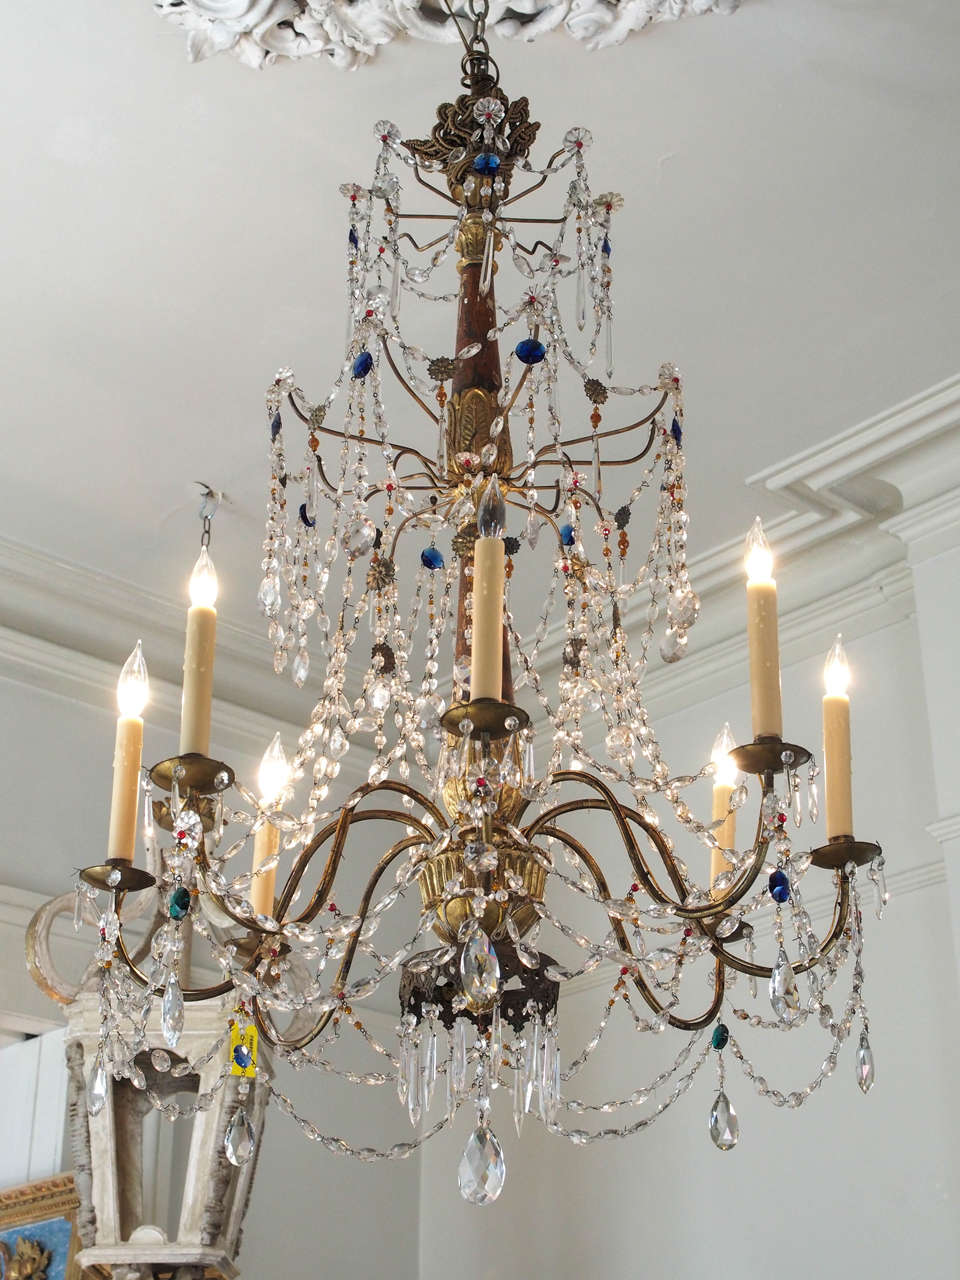 19th century eight lights Genoa crystal chandelier. Three tiers with a bottom tole crown. 
Mostly white crystals but a mixture of blue, red, orange and green crystals. Wood and giltwood center body with eight iron arms. US wired.